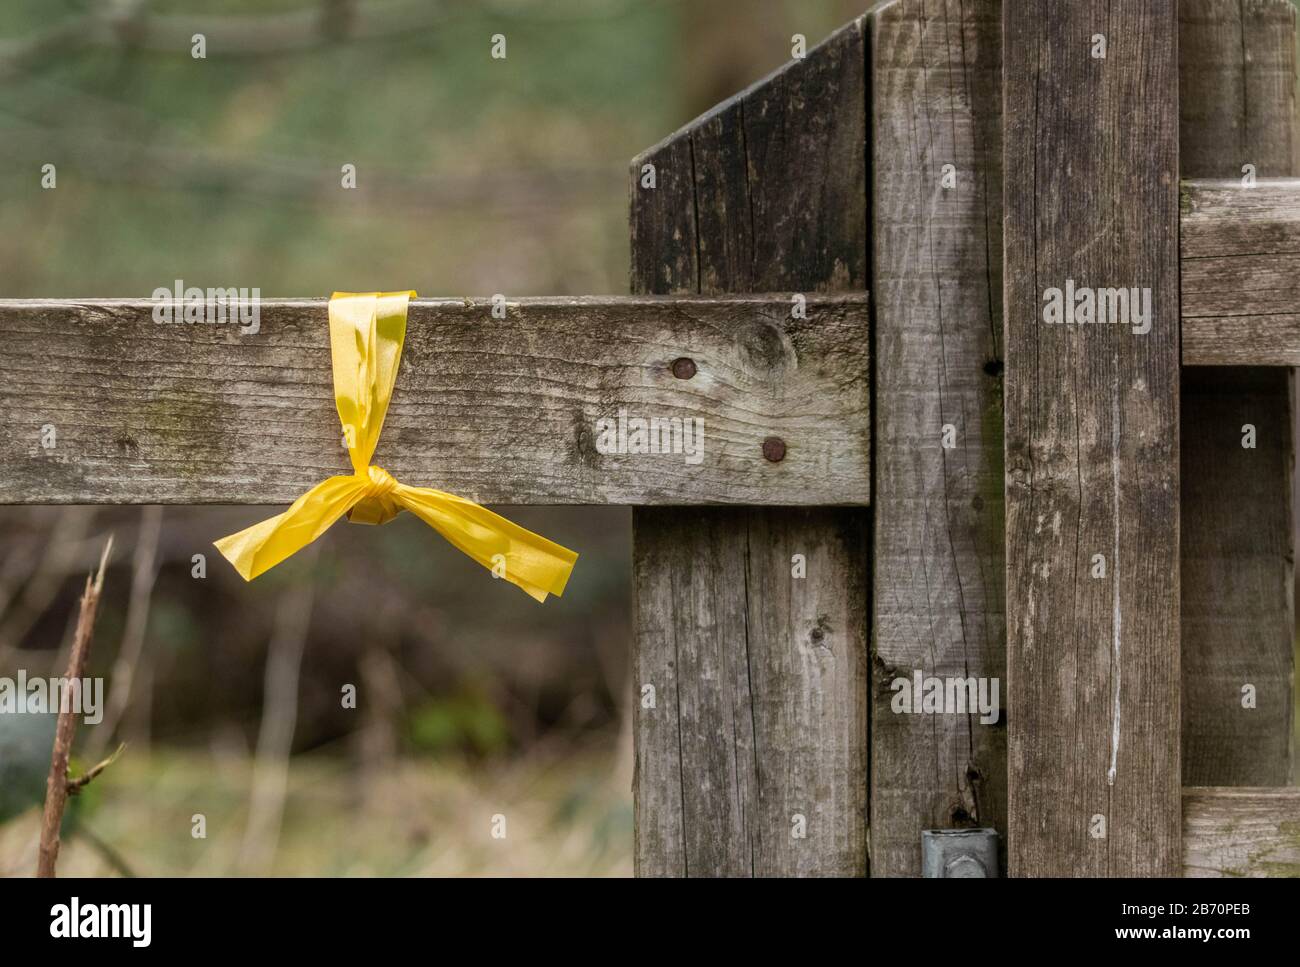 A yellow ribbon tied to a fence shows the route for a walking event. Stock Photo